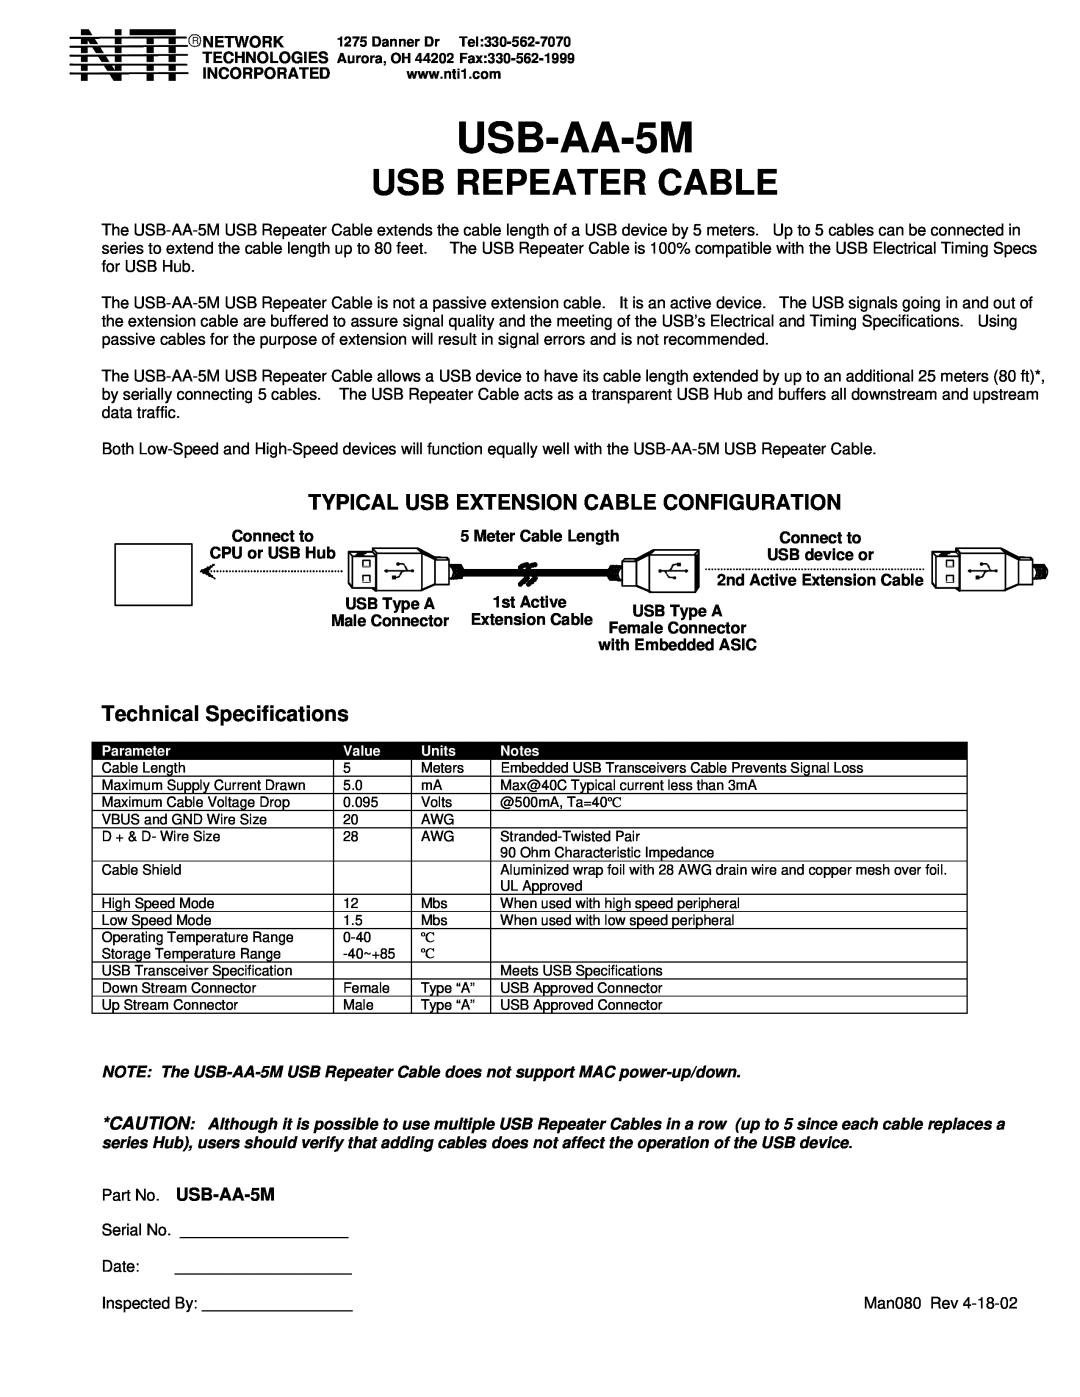 Video Products USB-AA-5M technical specifications Usb Repeater Cable, Typical Usb Extension Cable Configuration 